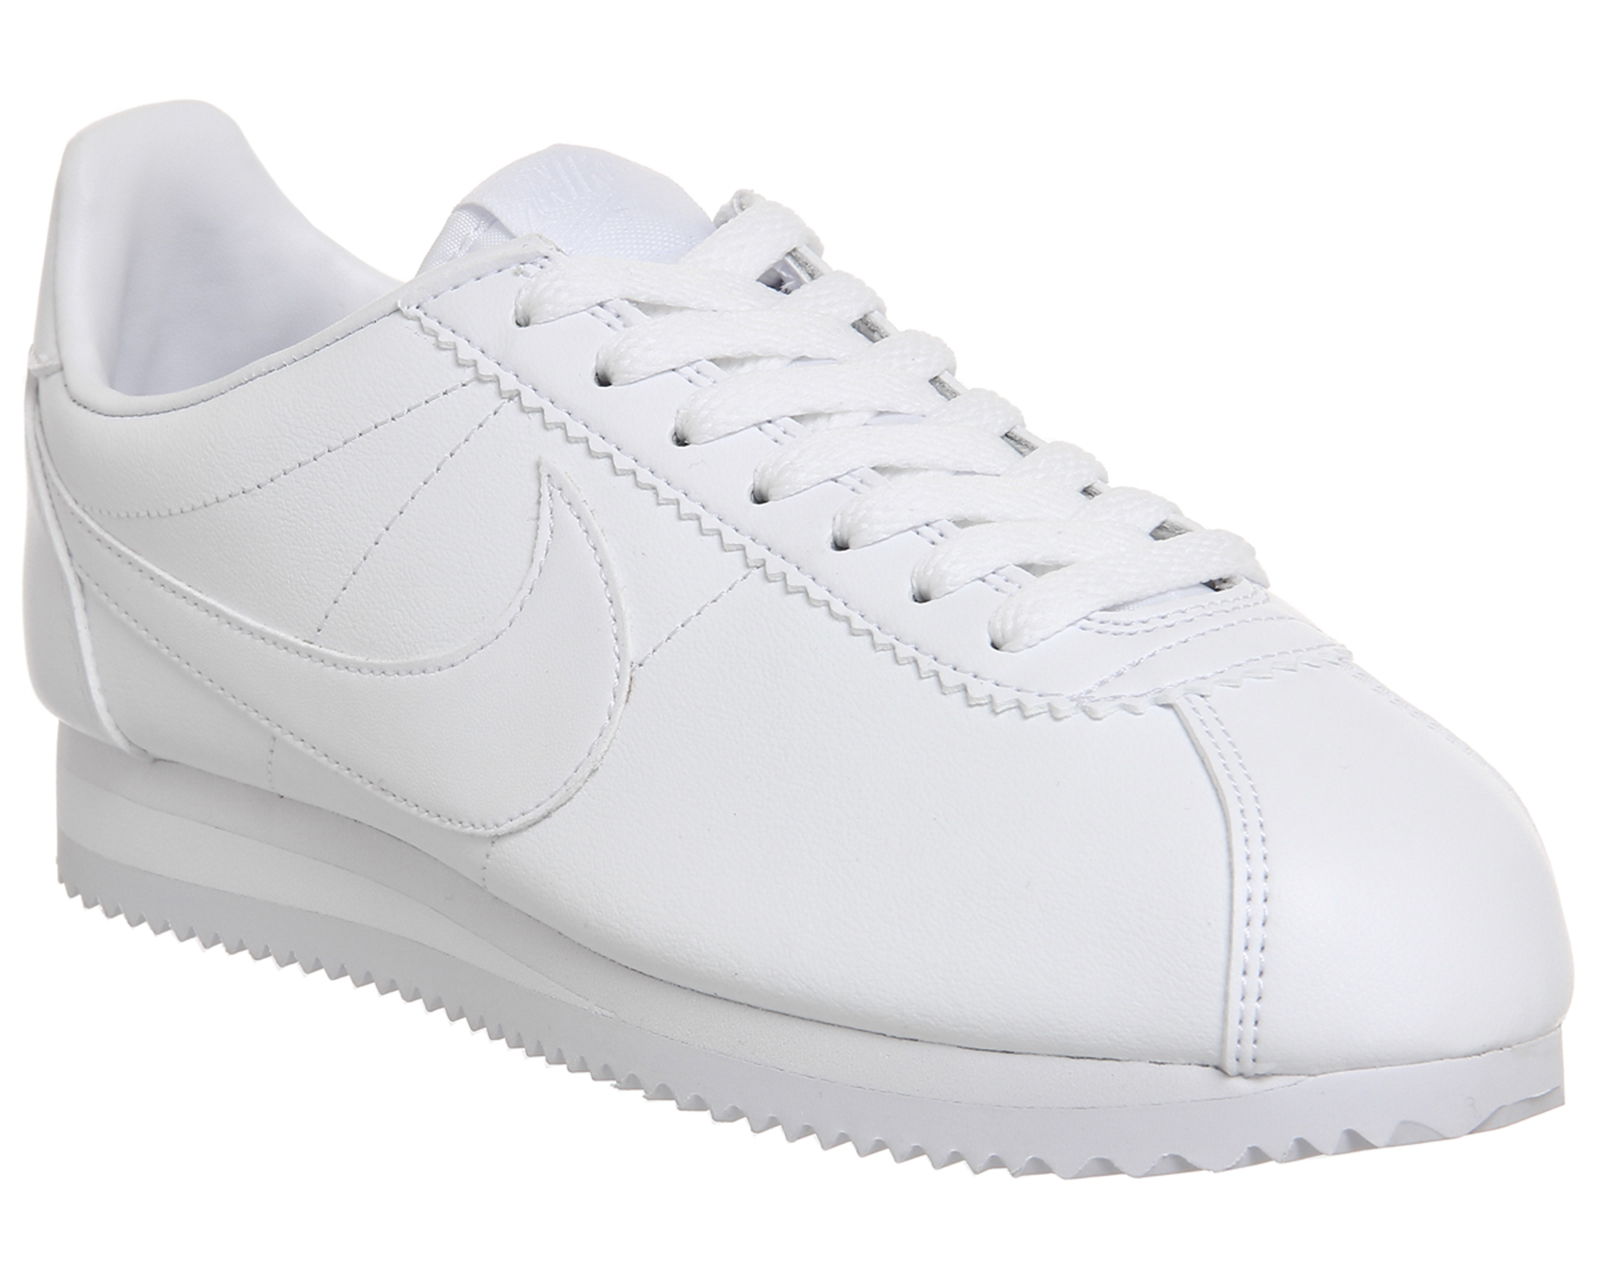 nike cortez all white leather mens